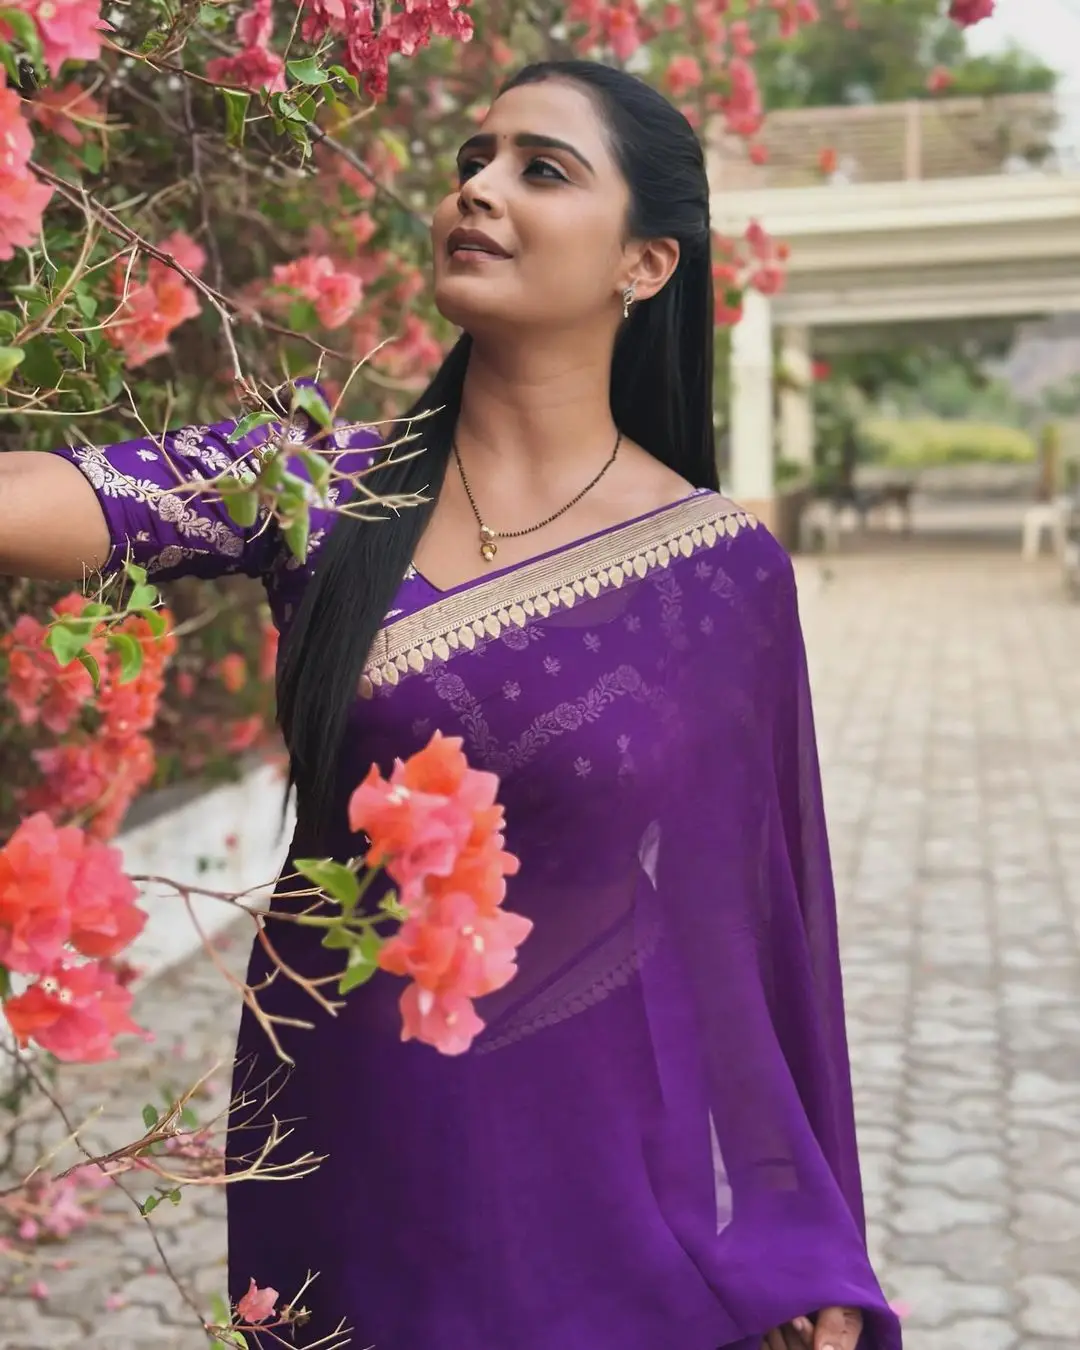 INDIAN GIRL KAVYA SHREE IN TRADITIONAL VIOLET SAREE BLOUSE 2